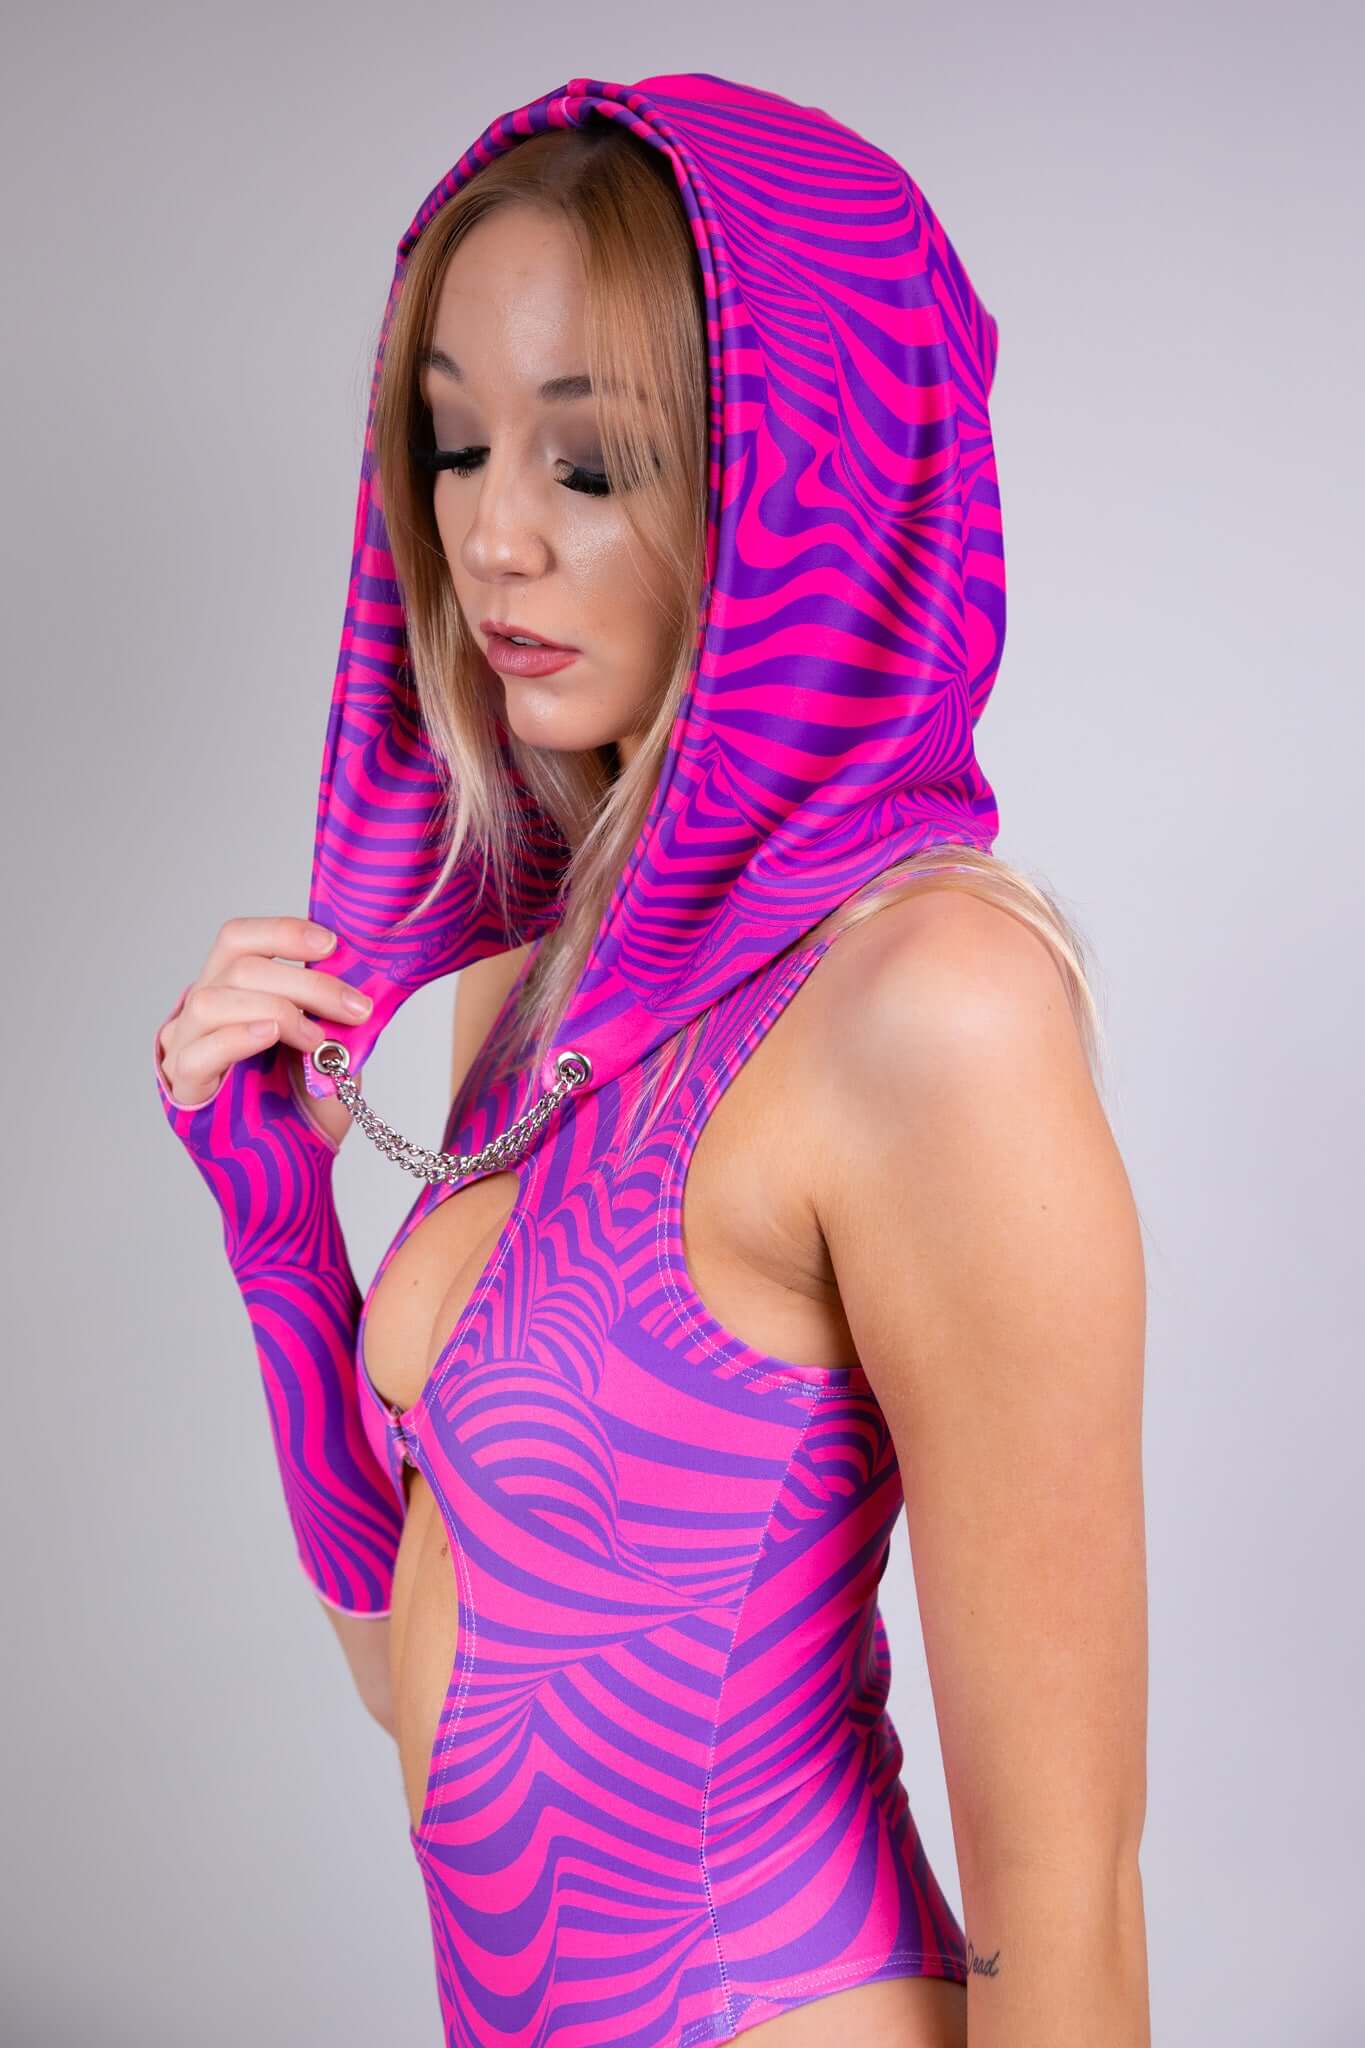 A woman with a hood and sleeveless bodysuit in pink and purple swirl patterns, featuring cut-out details. She has blonde hair and makeup.